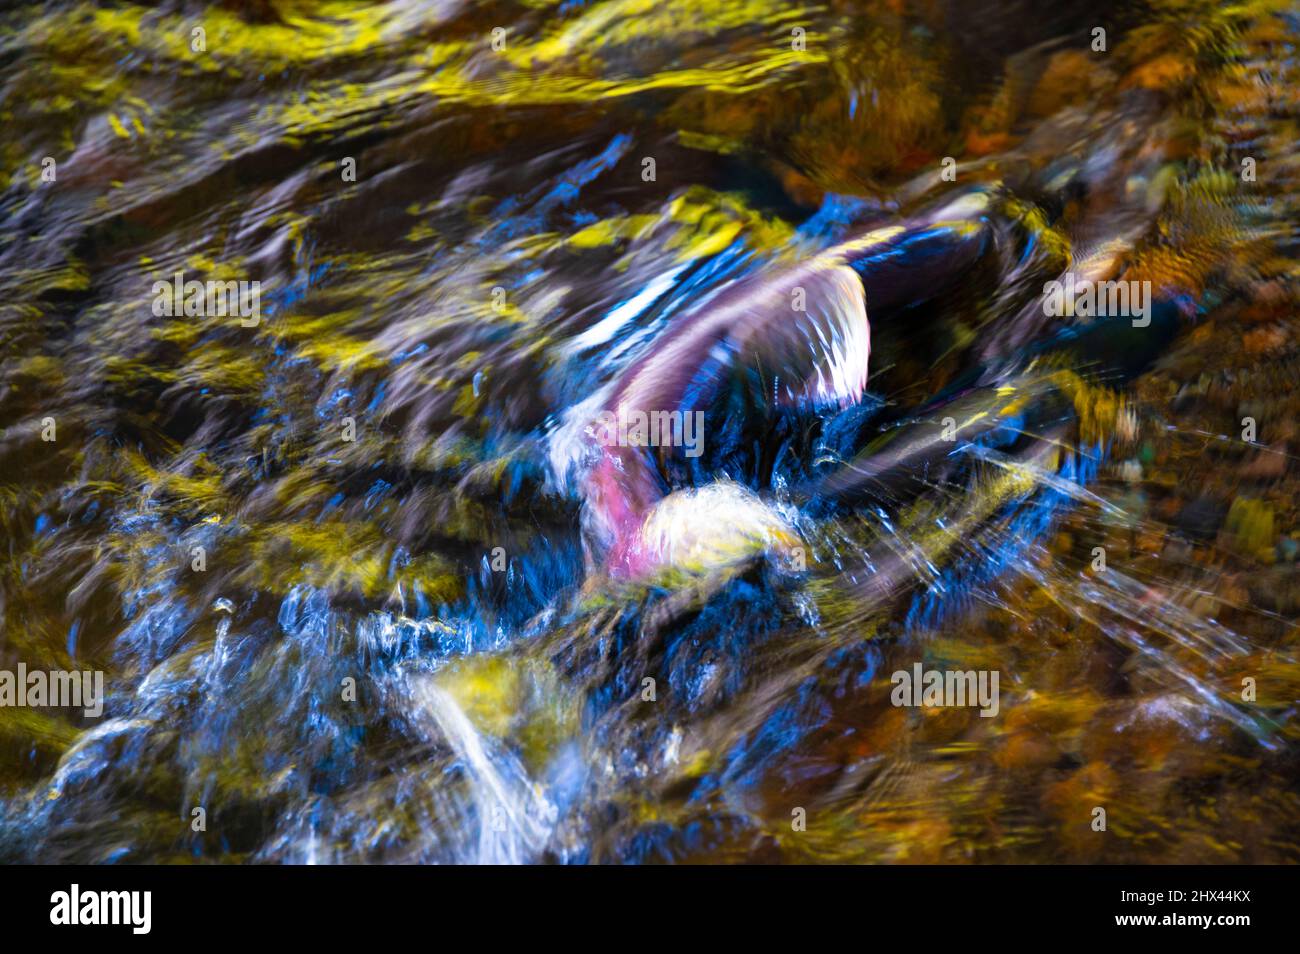 modern and abstract photo of a salmon in water Stock Photo